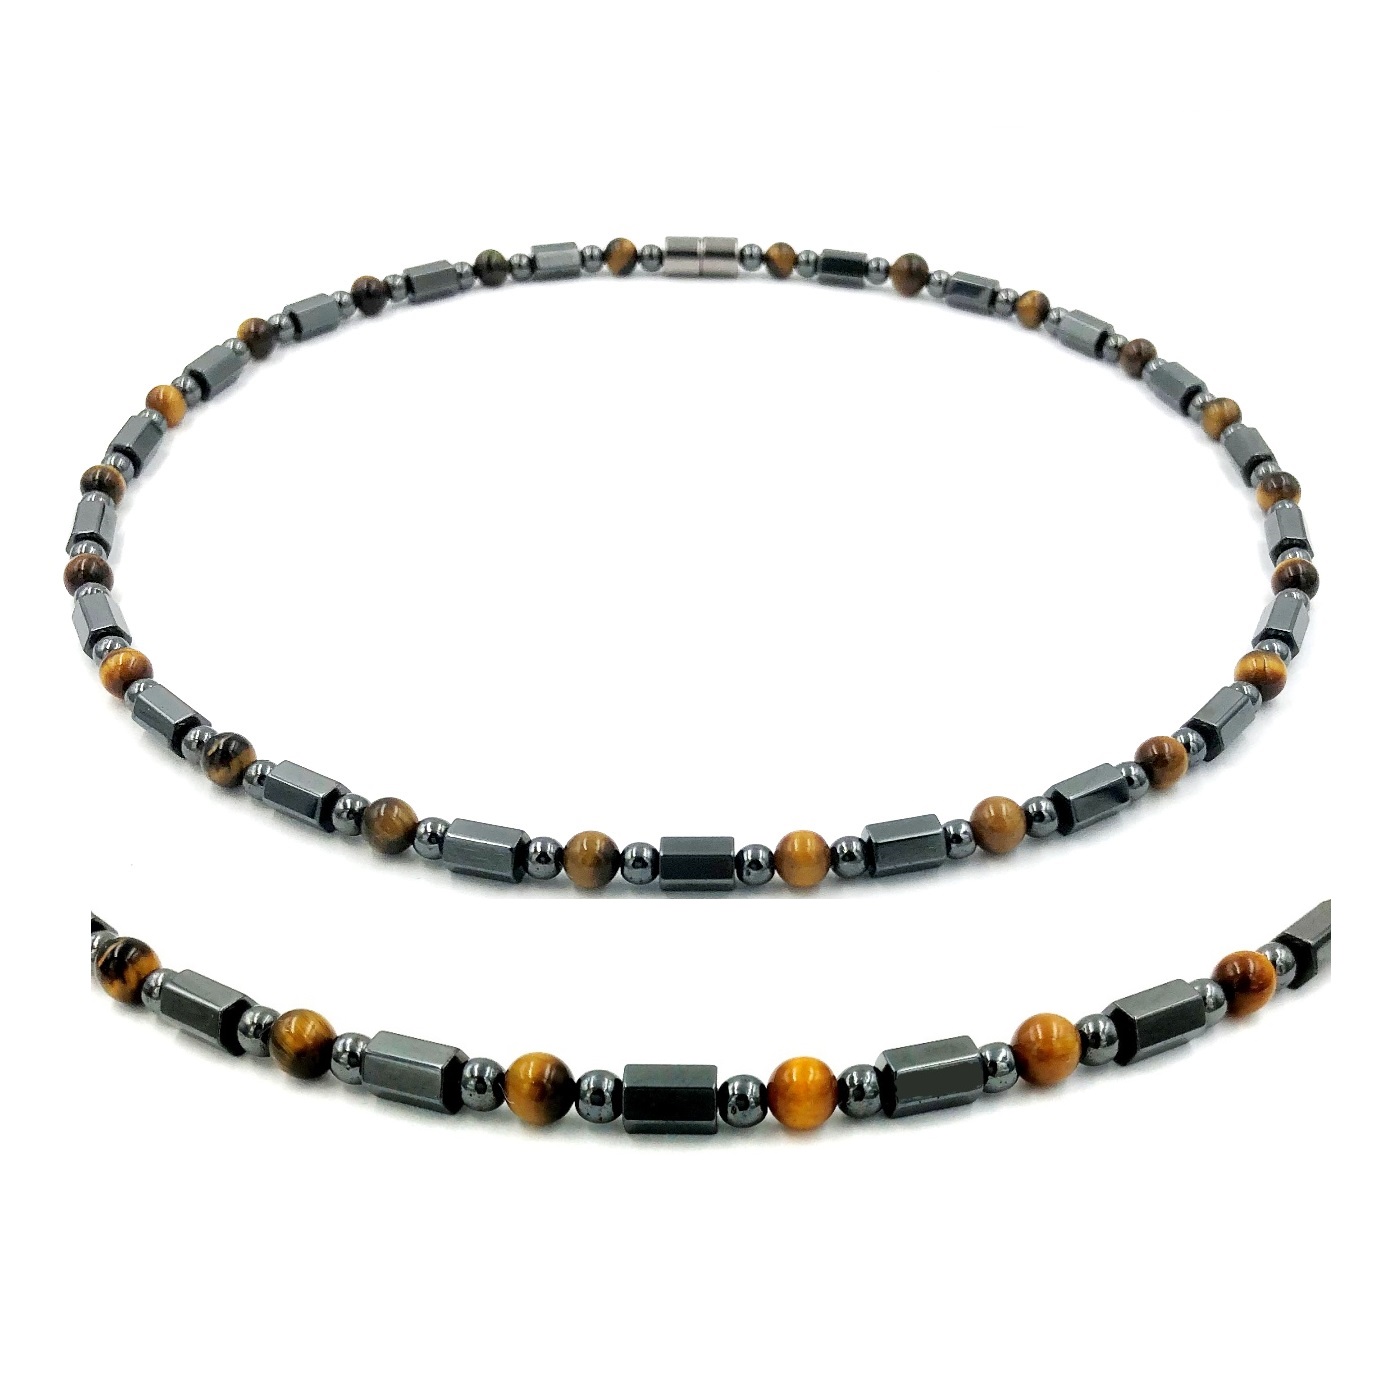 Eye Magnetic Therapy Magnetic Necklace With Natural Tiger-eye Beads #MN-401TE